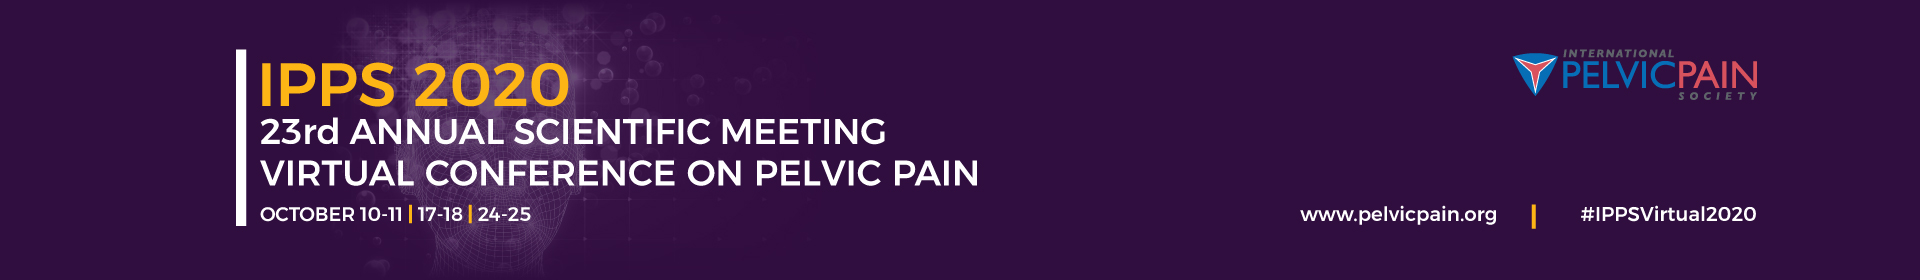 2020 Annual Scientific Meeting on Pelvic Pain Event Banner